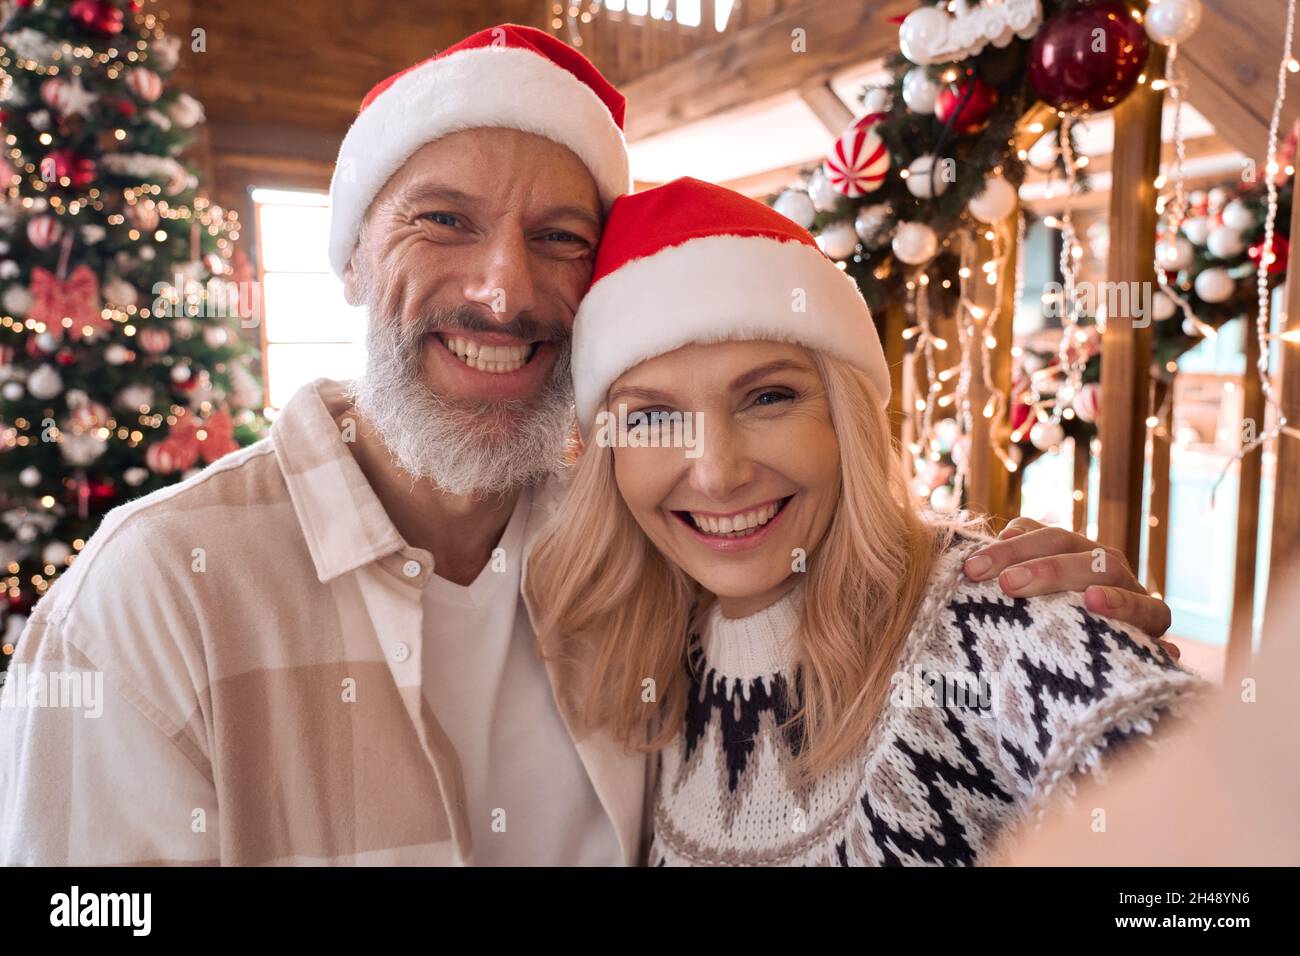 Happy older couple greeting family on Christmas video call, webcam view. Stock Photo